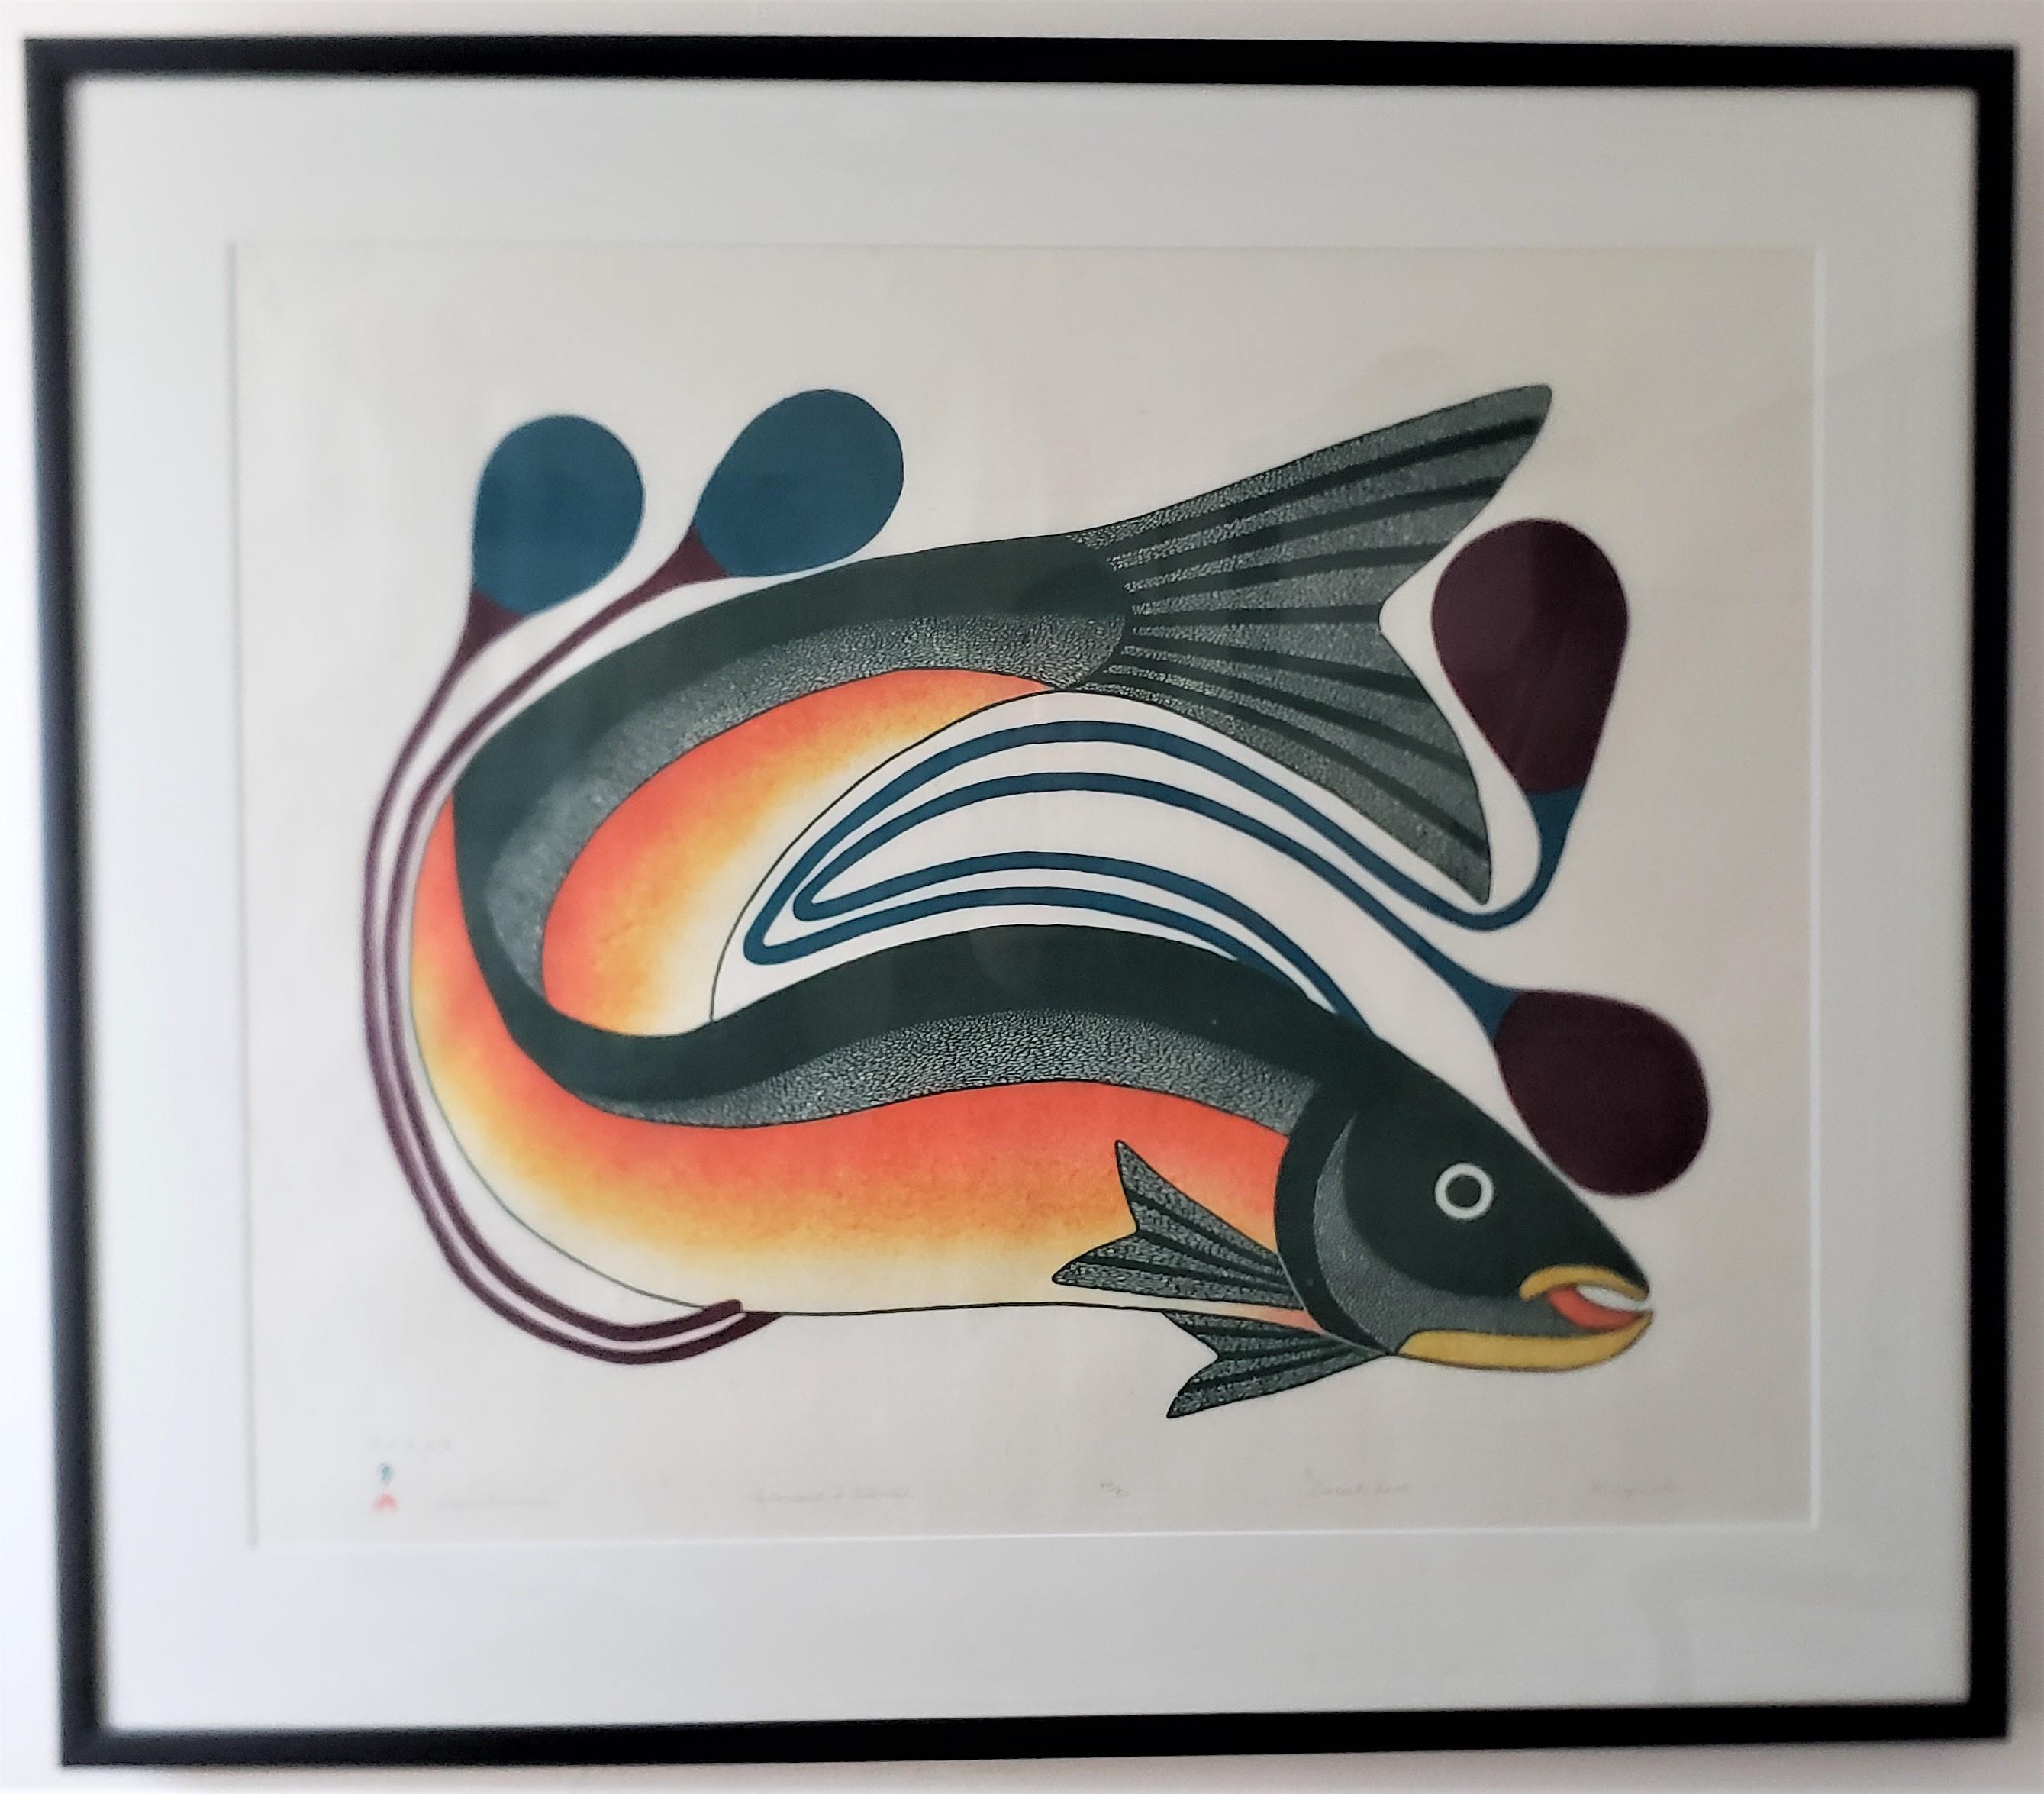 This large hand-crafted and numbered print was done by the very well known Inuit artist Kenojuak Ashevak of Cape Dorset Canada in 2005 in her signature style. This very colorful stone cut and stencil print is titled 